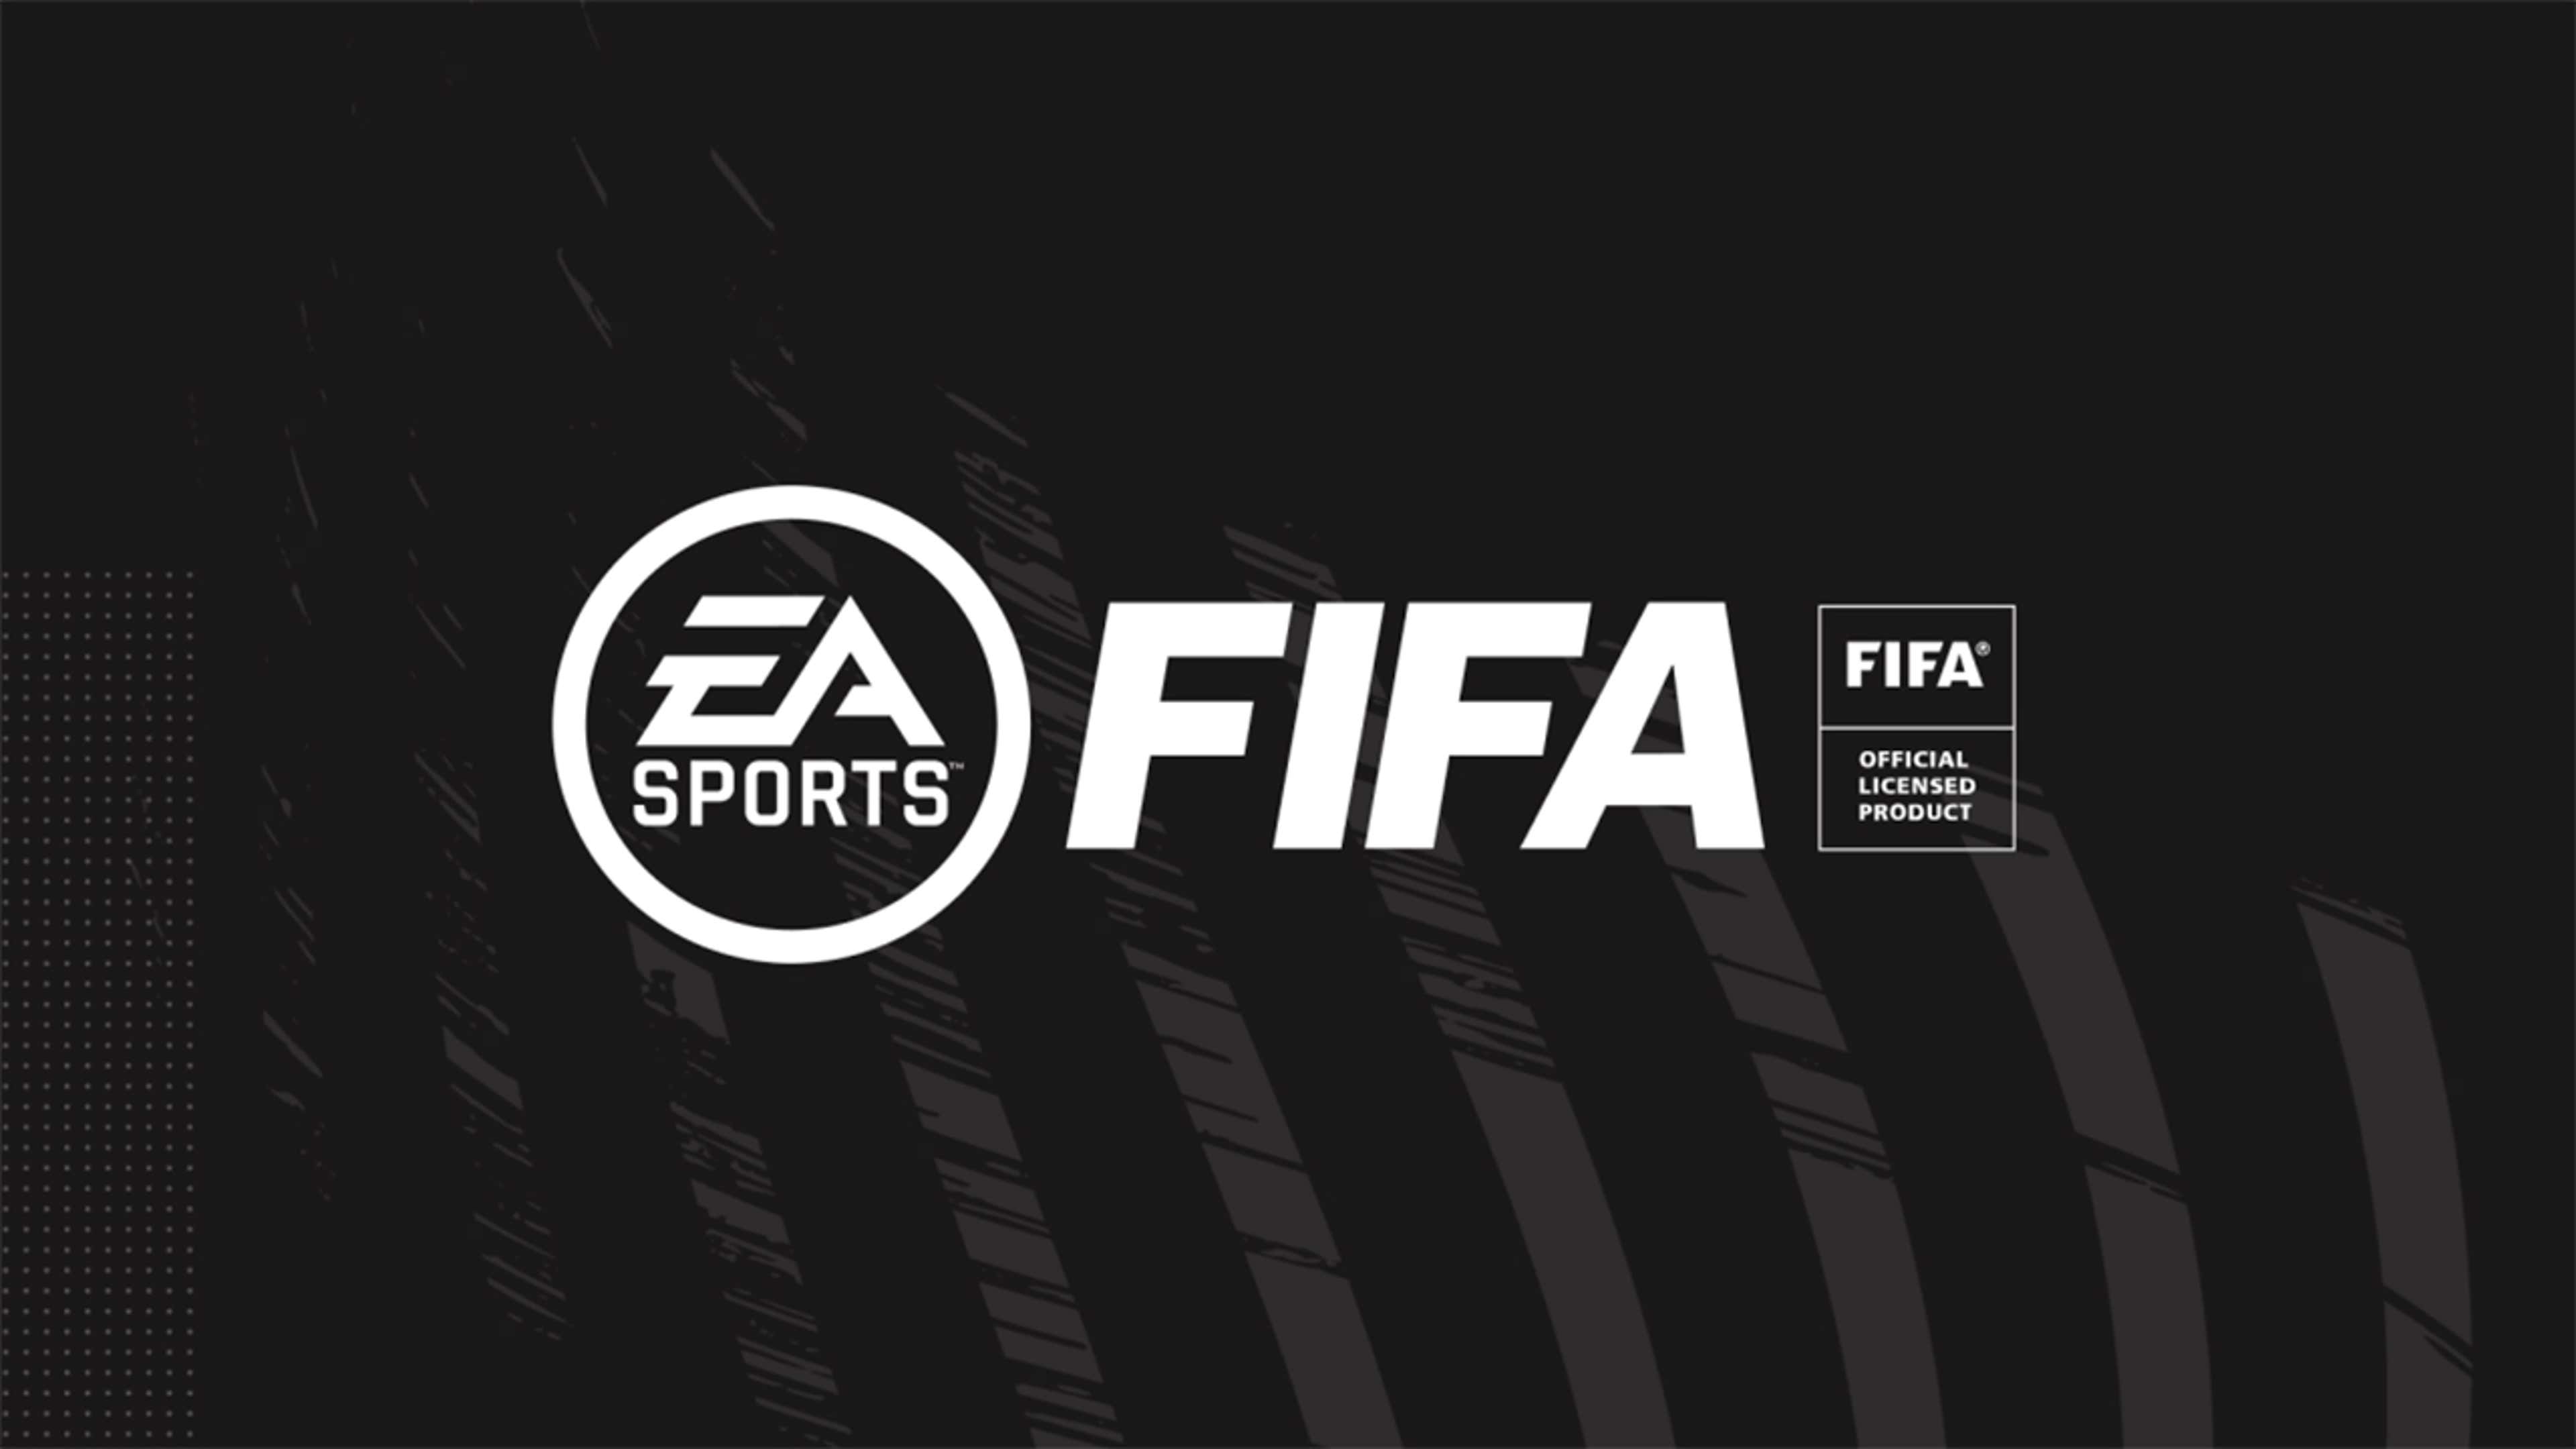 FIFA games will end after 30 years as EA announces name change